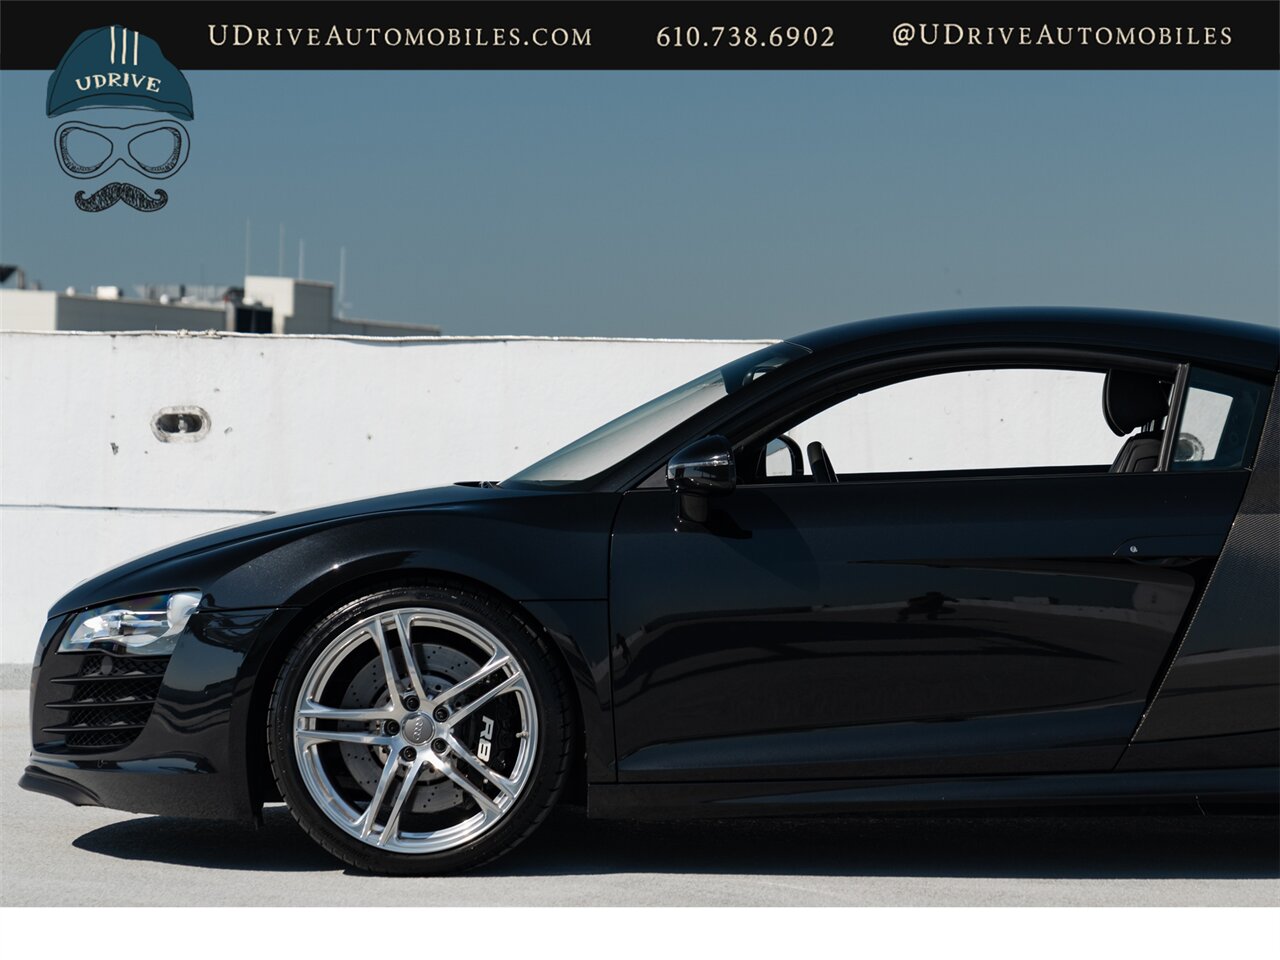 2009 Audi R8 Quattro  4.2L V8 6 Speed Manual - Photo 10 - West Chester, PA 19382